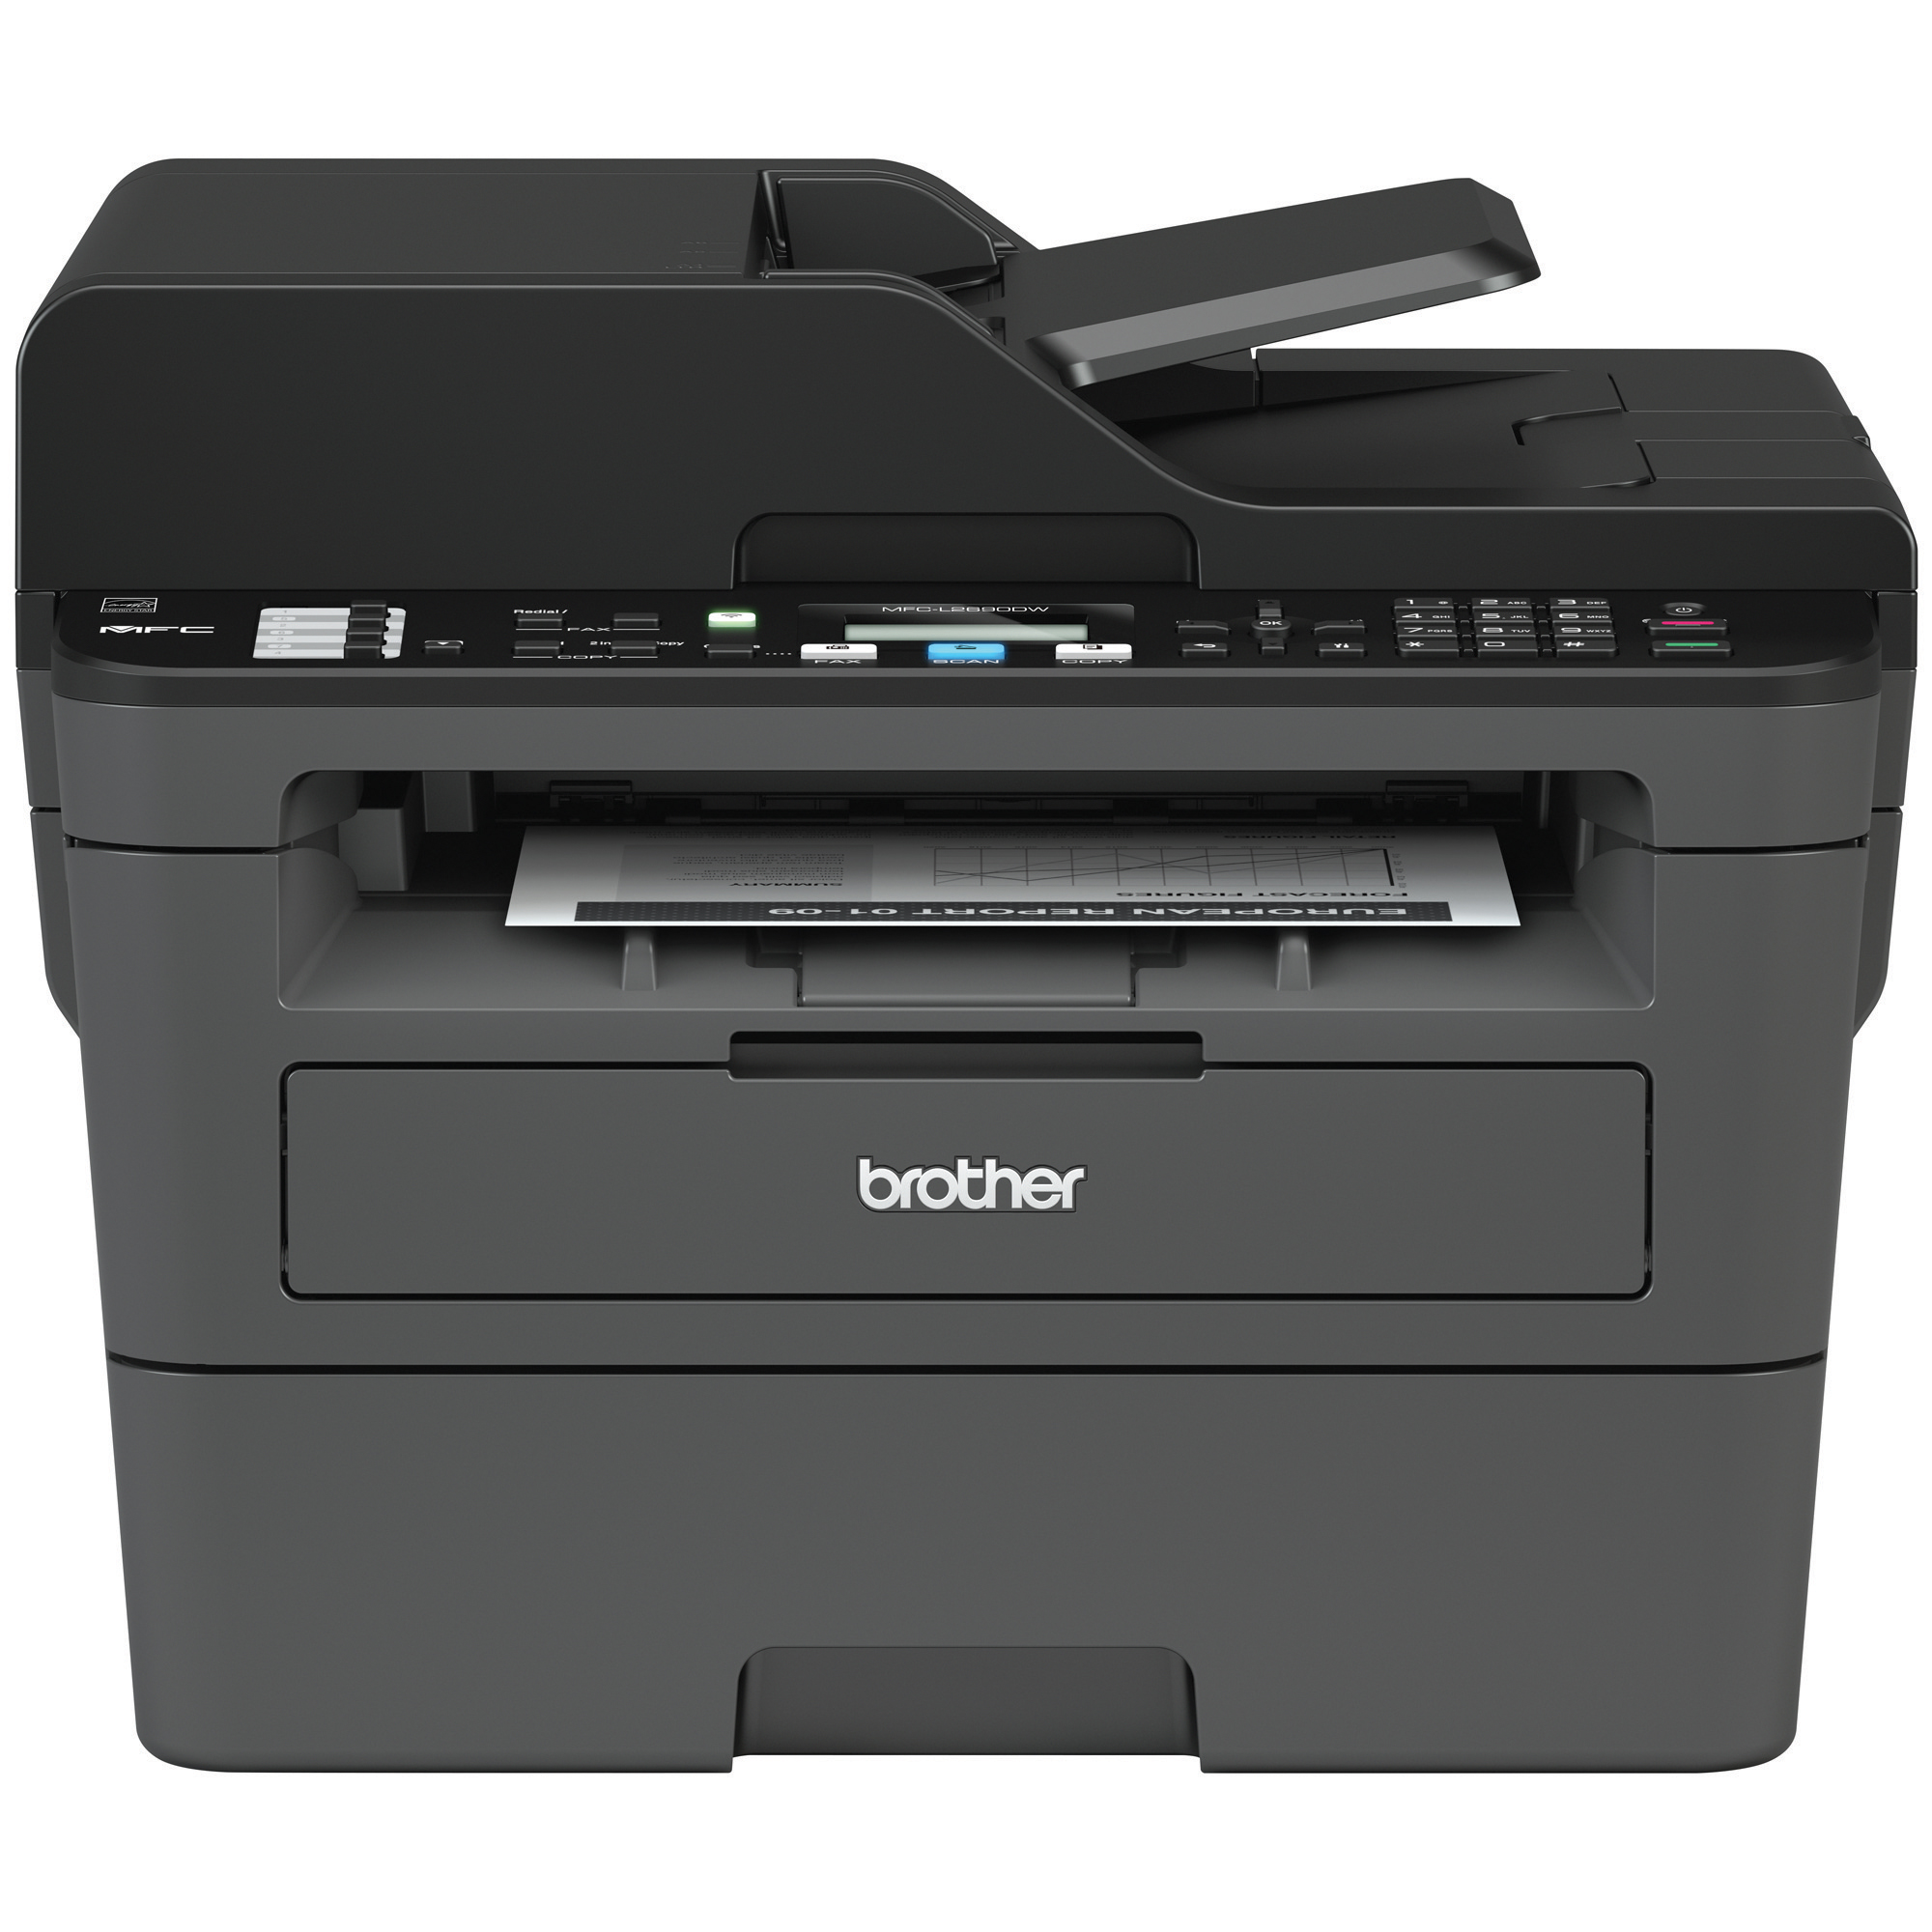 Brother MFC-L2690DW Monochrome Laser All-in-One Printer, Duplex Printing, Wireless Connectivity with ADF YMMV at WM BM $156